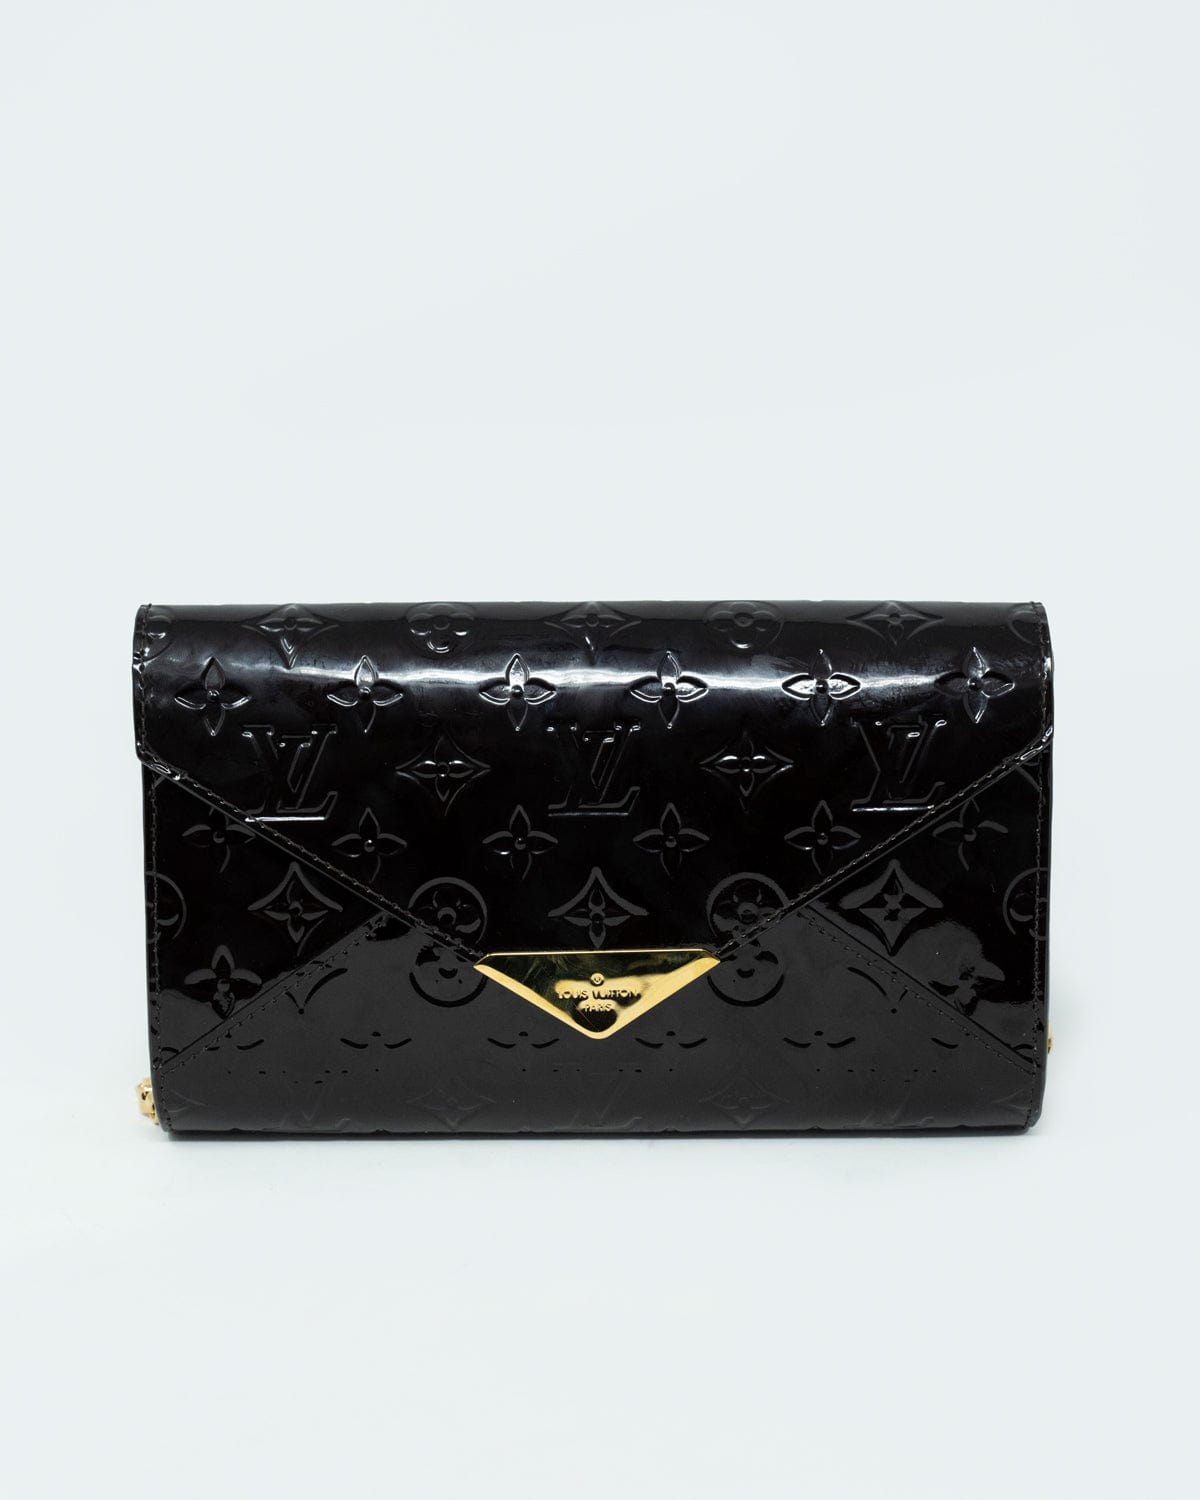 Louis Vuitton women's black patent leather small bag on a chain